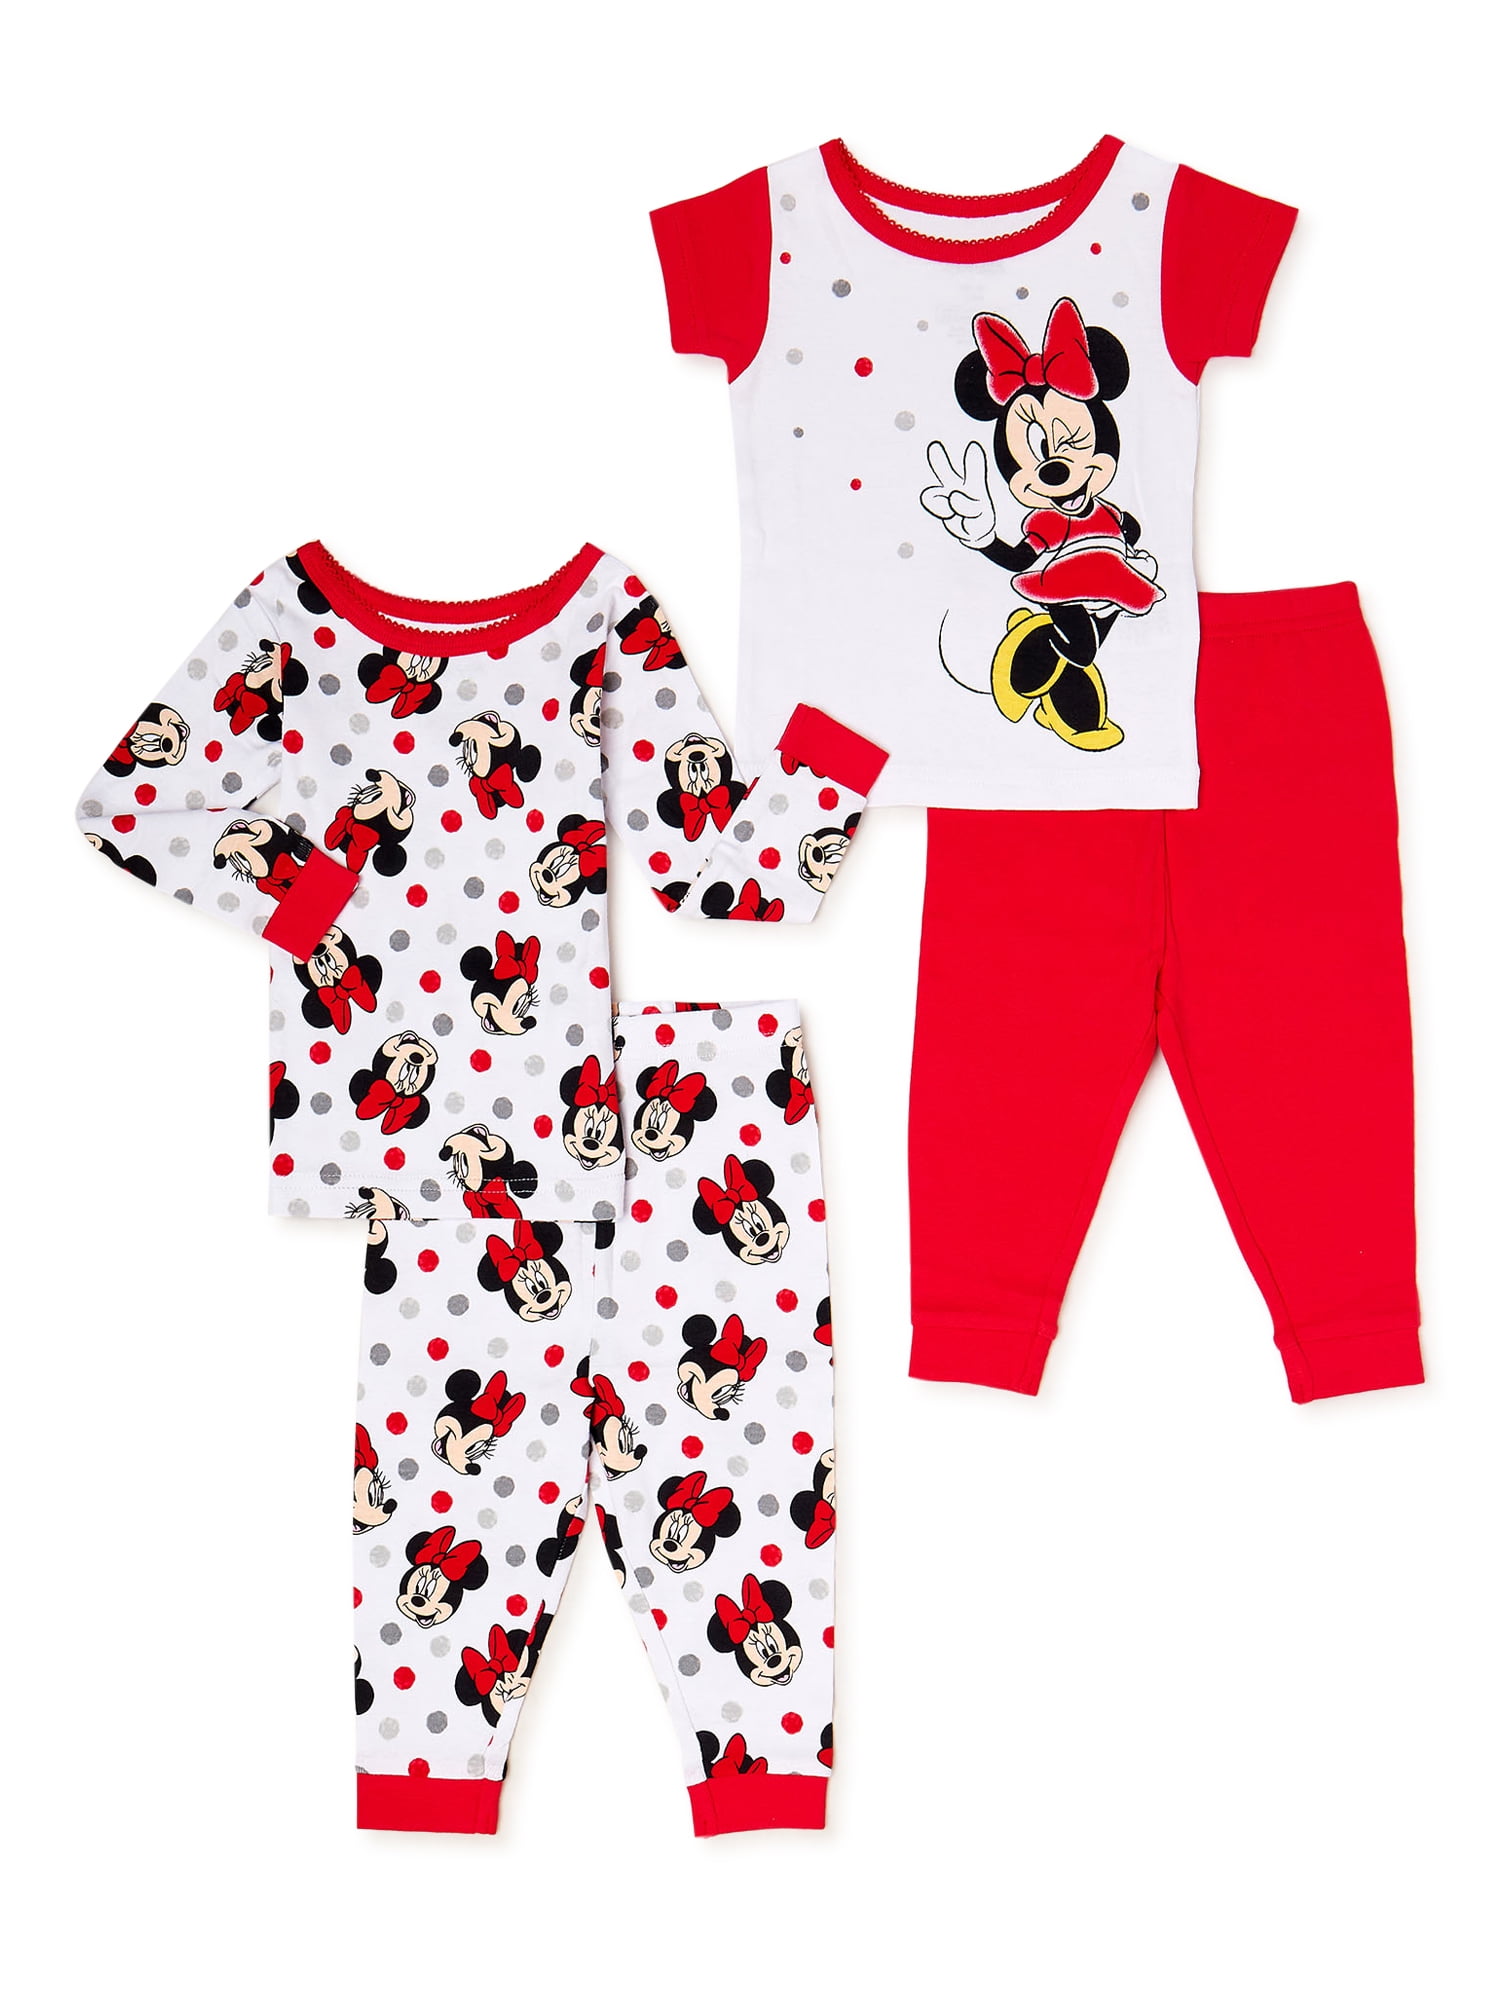 Disney Minnie Mouse Pyjamas Cotton Toddler and Girls PJs Age 18 Months 14 Years 